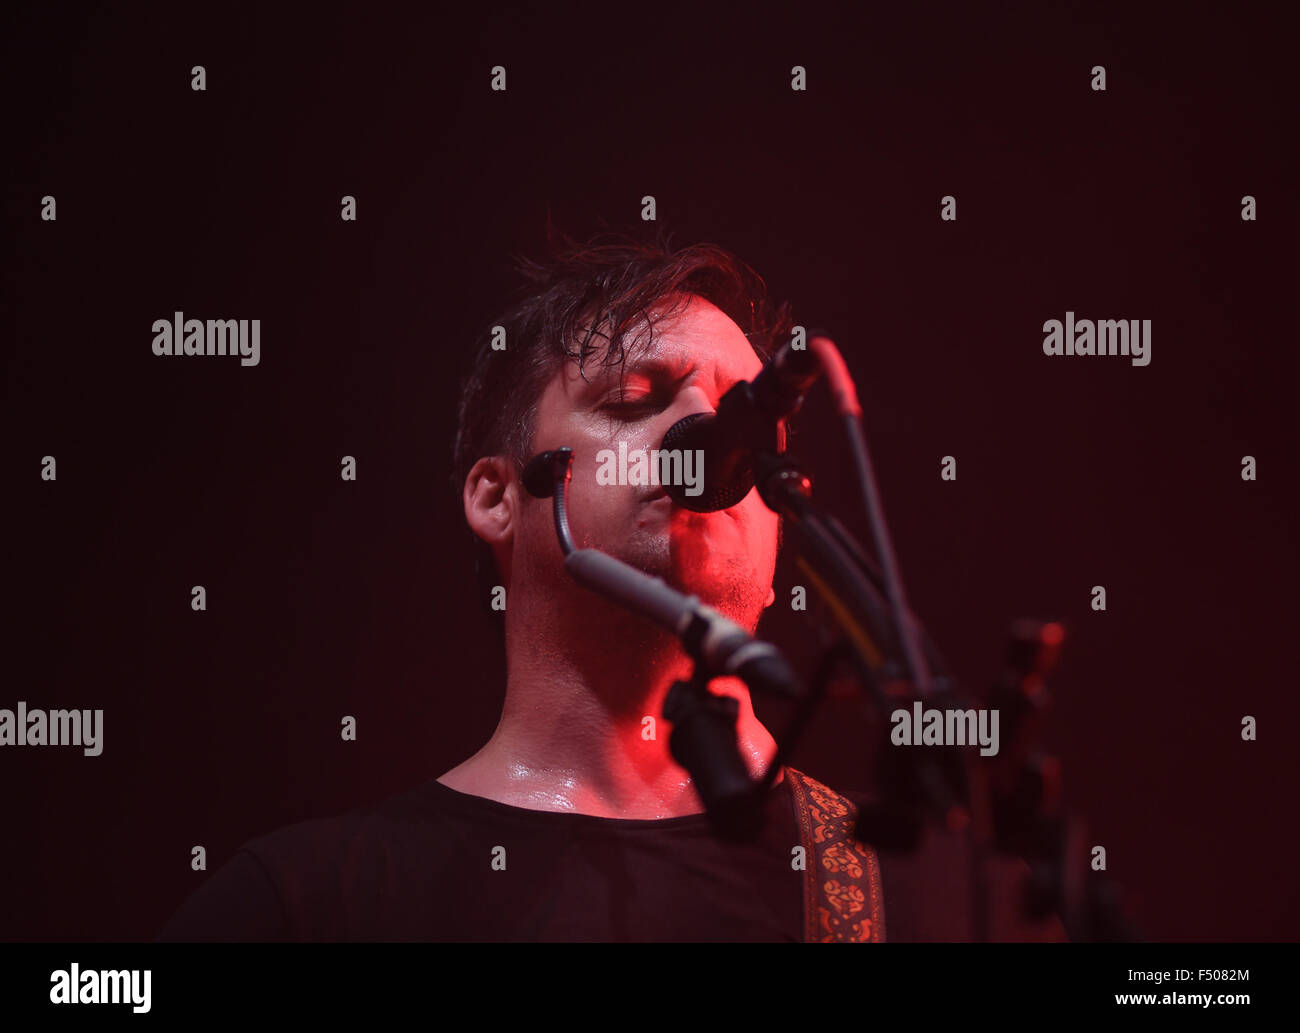 Oct. 24, 2015 - Norfolk, VIRGINIA, USA - MODEST MOUSE comes to the CONSTANT CENTER at OLD DOMINION UNIVERSITY  in NORFOLK, VIRGINIA on 24 OCTOBER 2015. (Credit Image: © Jeff Moore via ZUMA Wire) Stock Photo